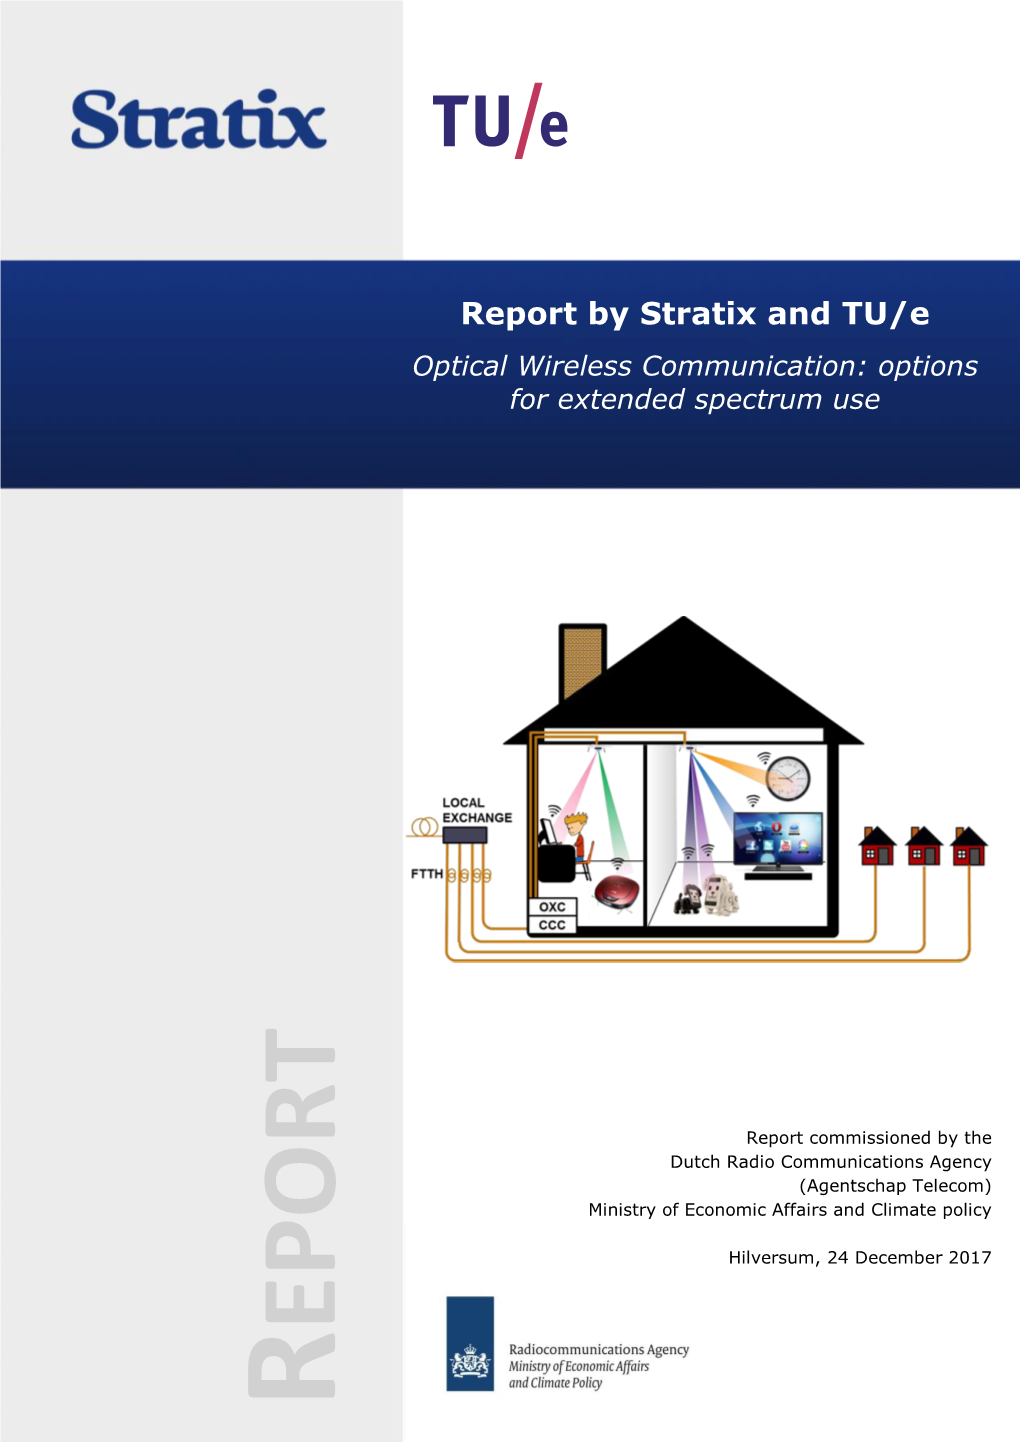 Report by Stratix and TU/E Optical Wireless Communication: Options for Extended Spectrum Use